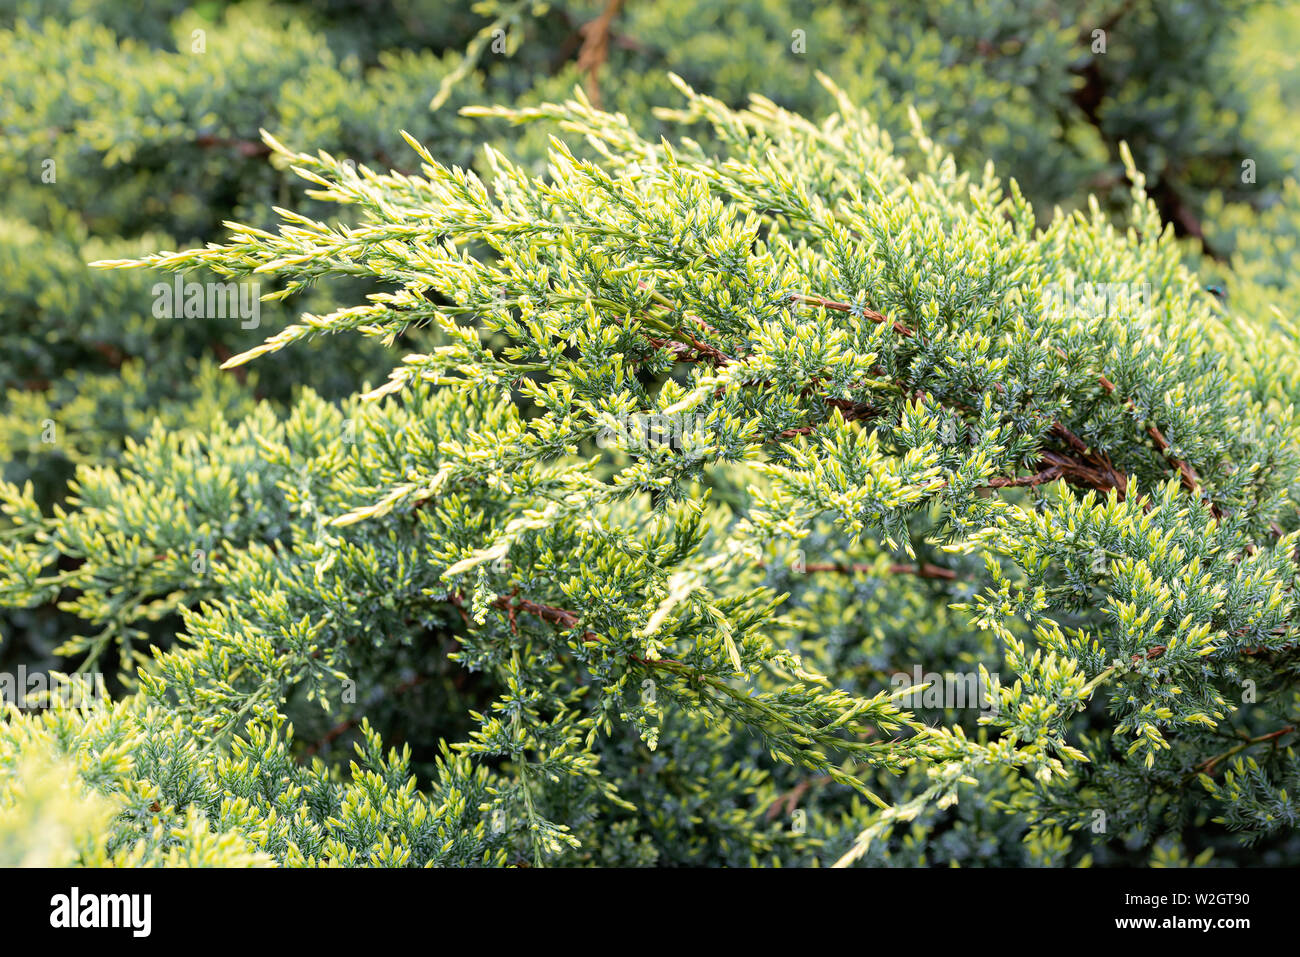 Close-up of Juniperus horizontalis 'Golden carpet', also known as creeping juniper or creeping cedar, with young light green sprouts at the beginning Stock Photo